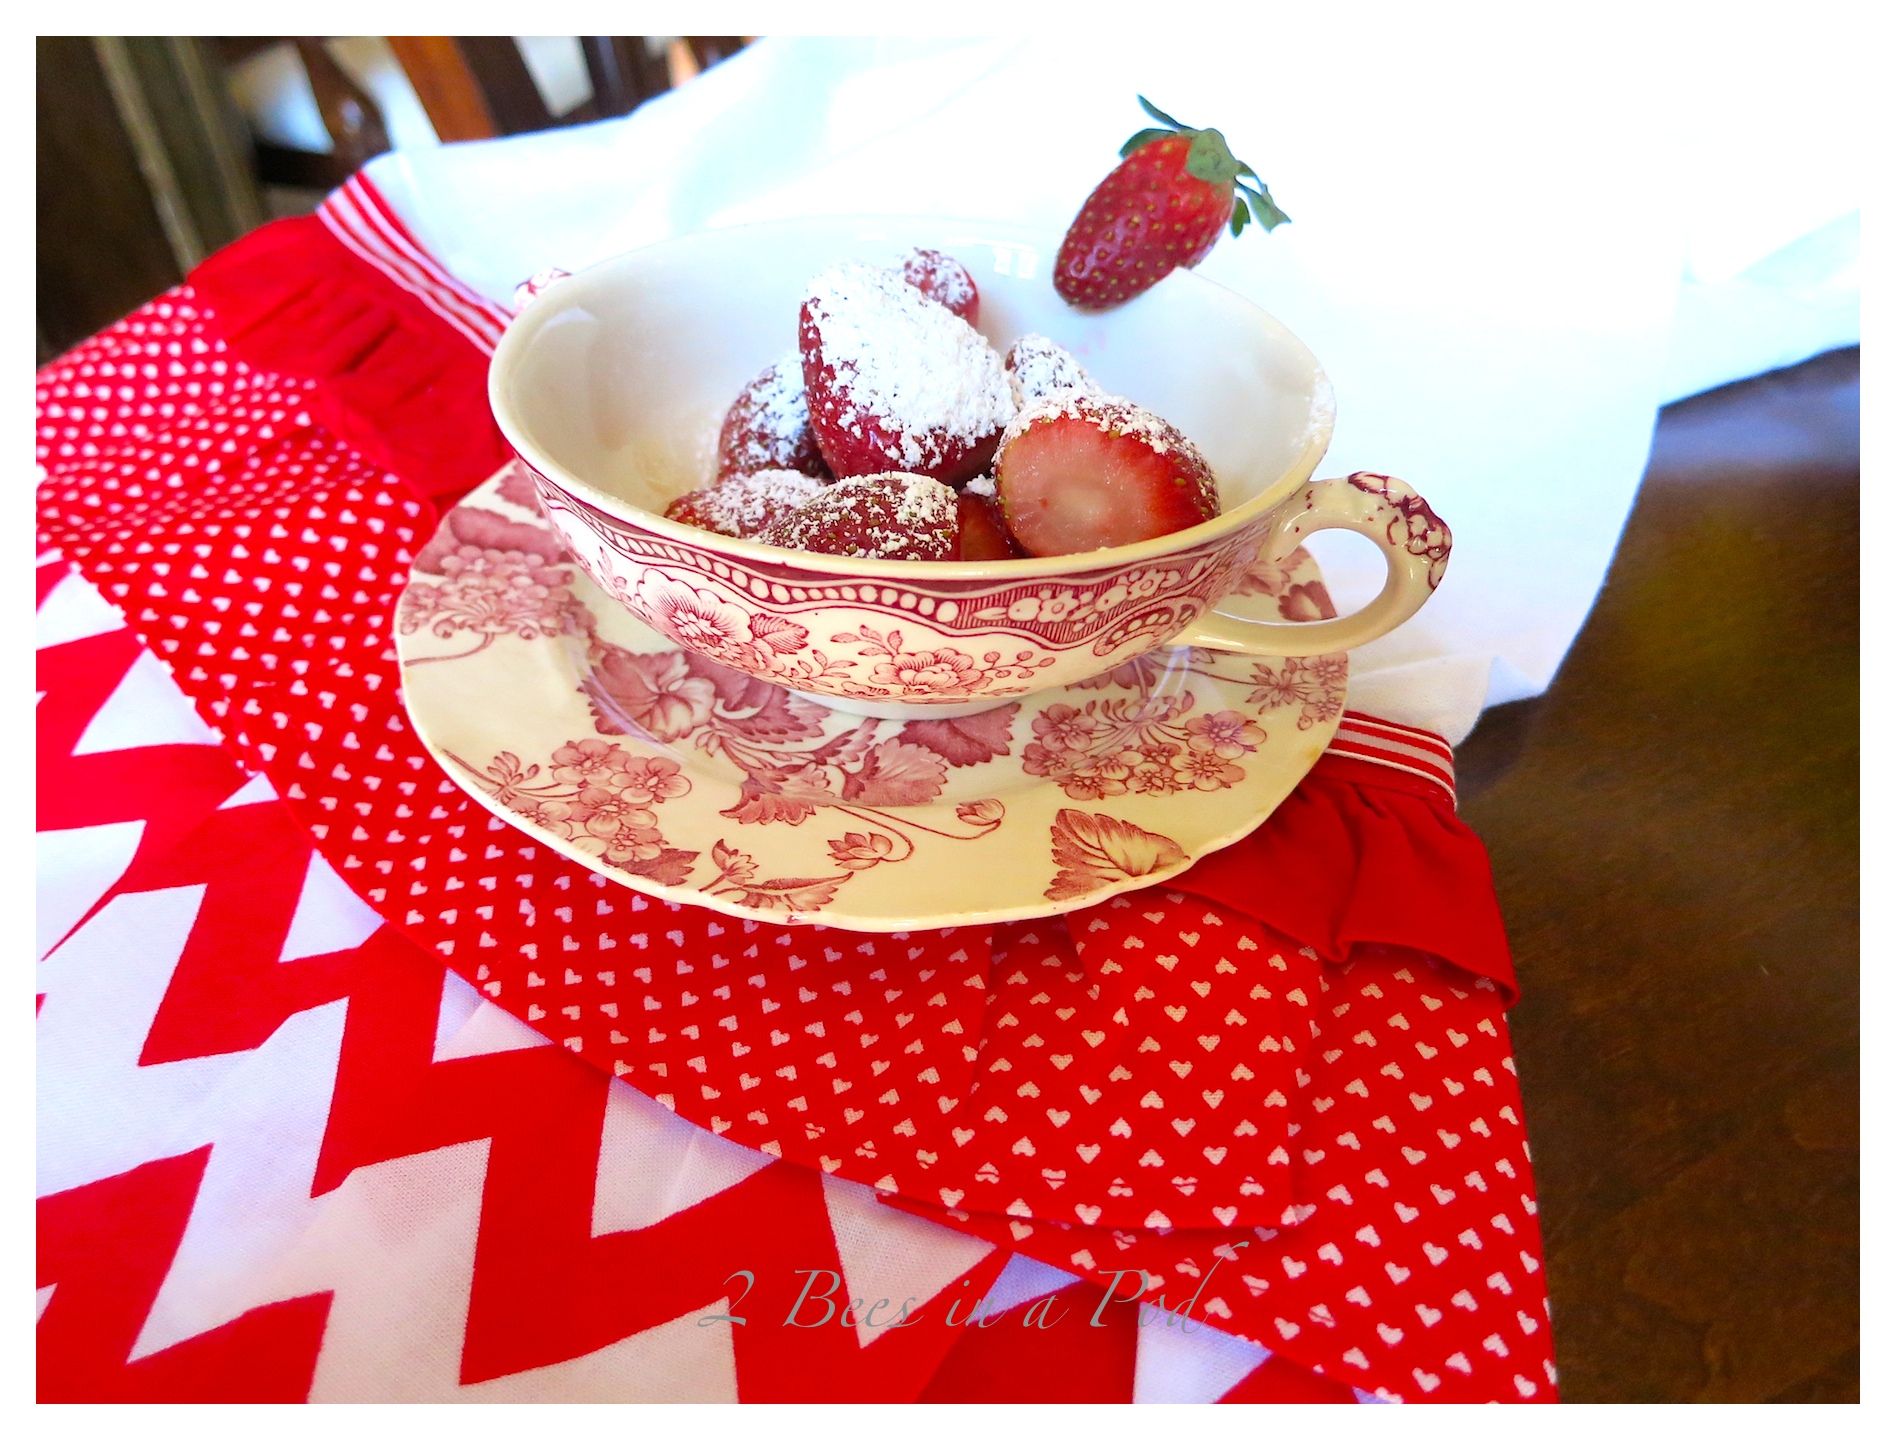 Hand sewn Valentine tea towel - for just a little bit of holiday in the kitchen.